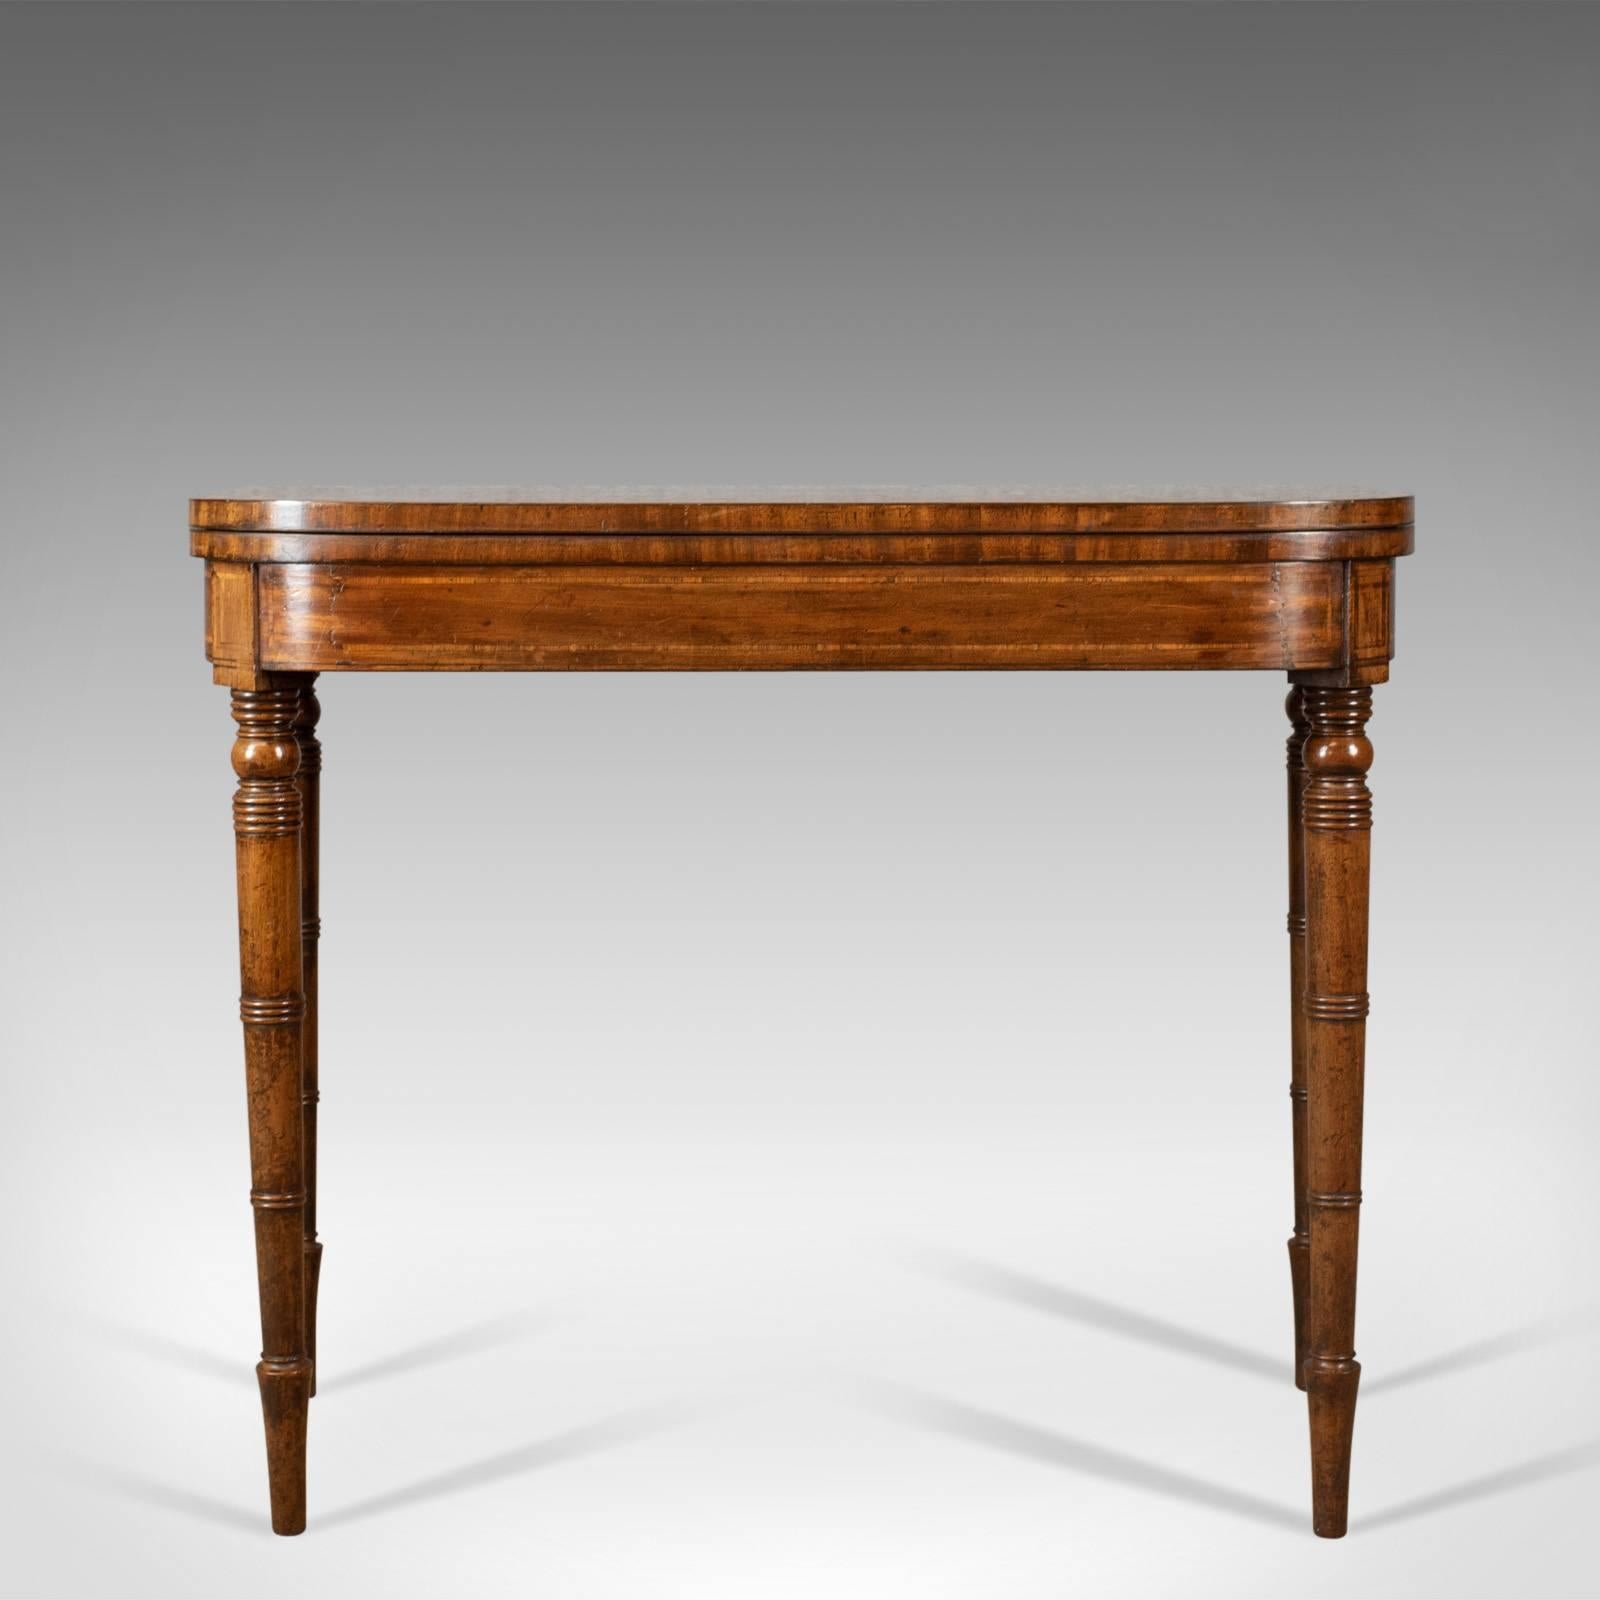 This is an antique card table, a late Georgian, English fold-over games table dating to circa 1820.

Super pale mahogany displaying grain interest
Good colour and a desirable aged patina 
Finely crossbanded, complimentary border
Inlaid,